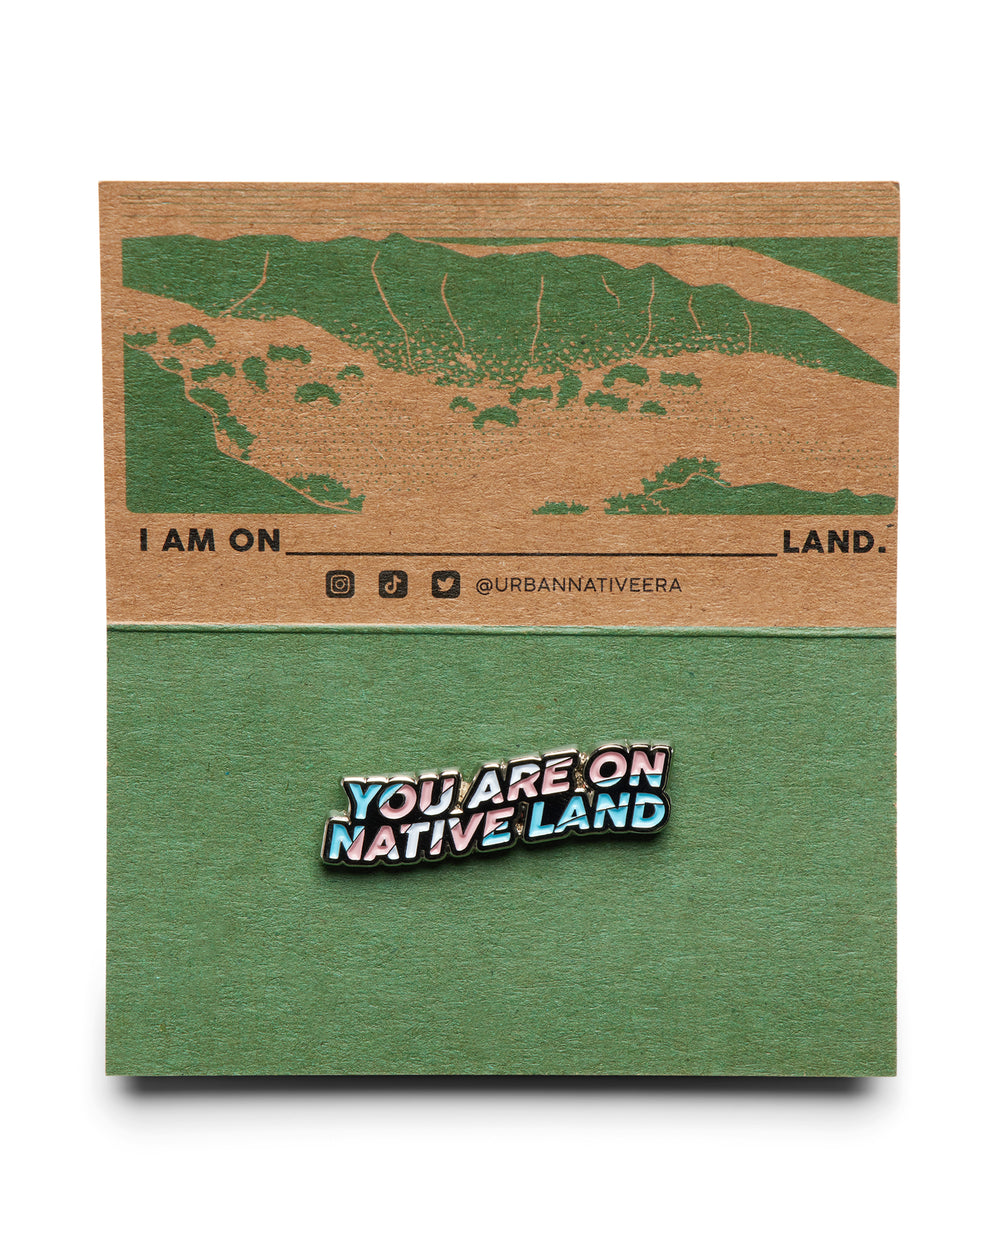 'YOU ARE ON NATIVE LAND' PRIDE PIN - TRANSGENDER FLAG